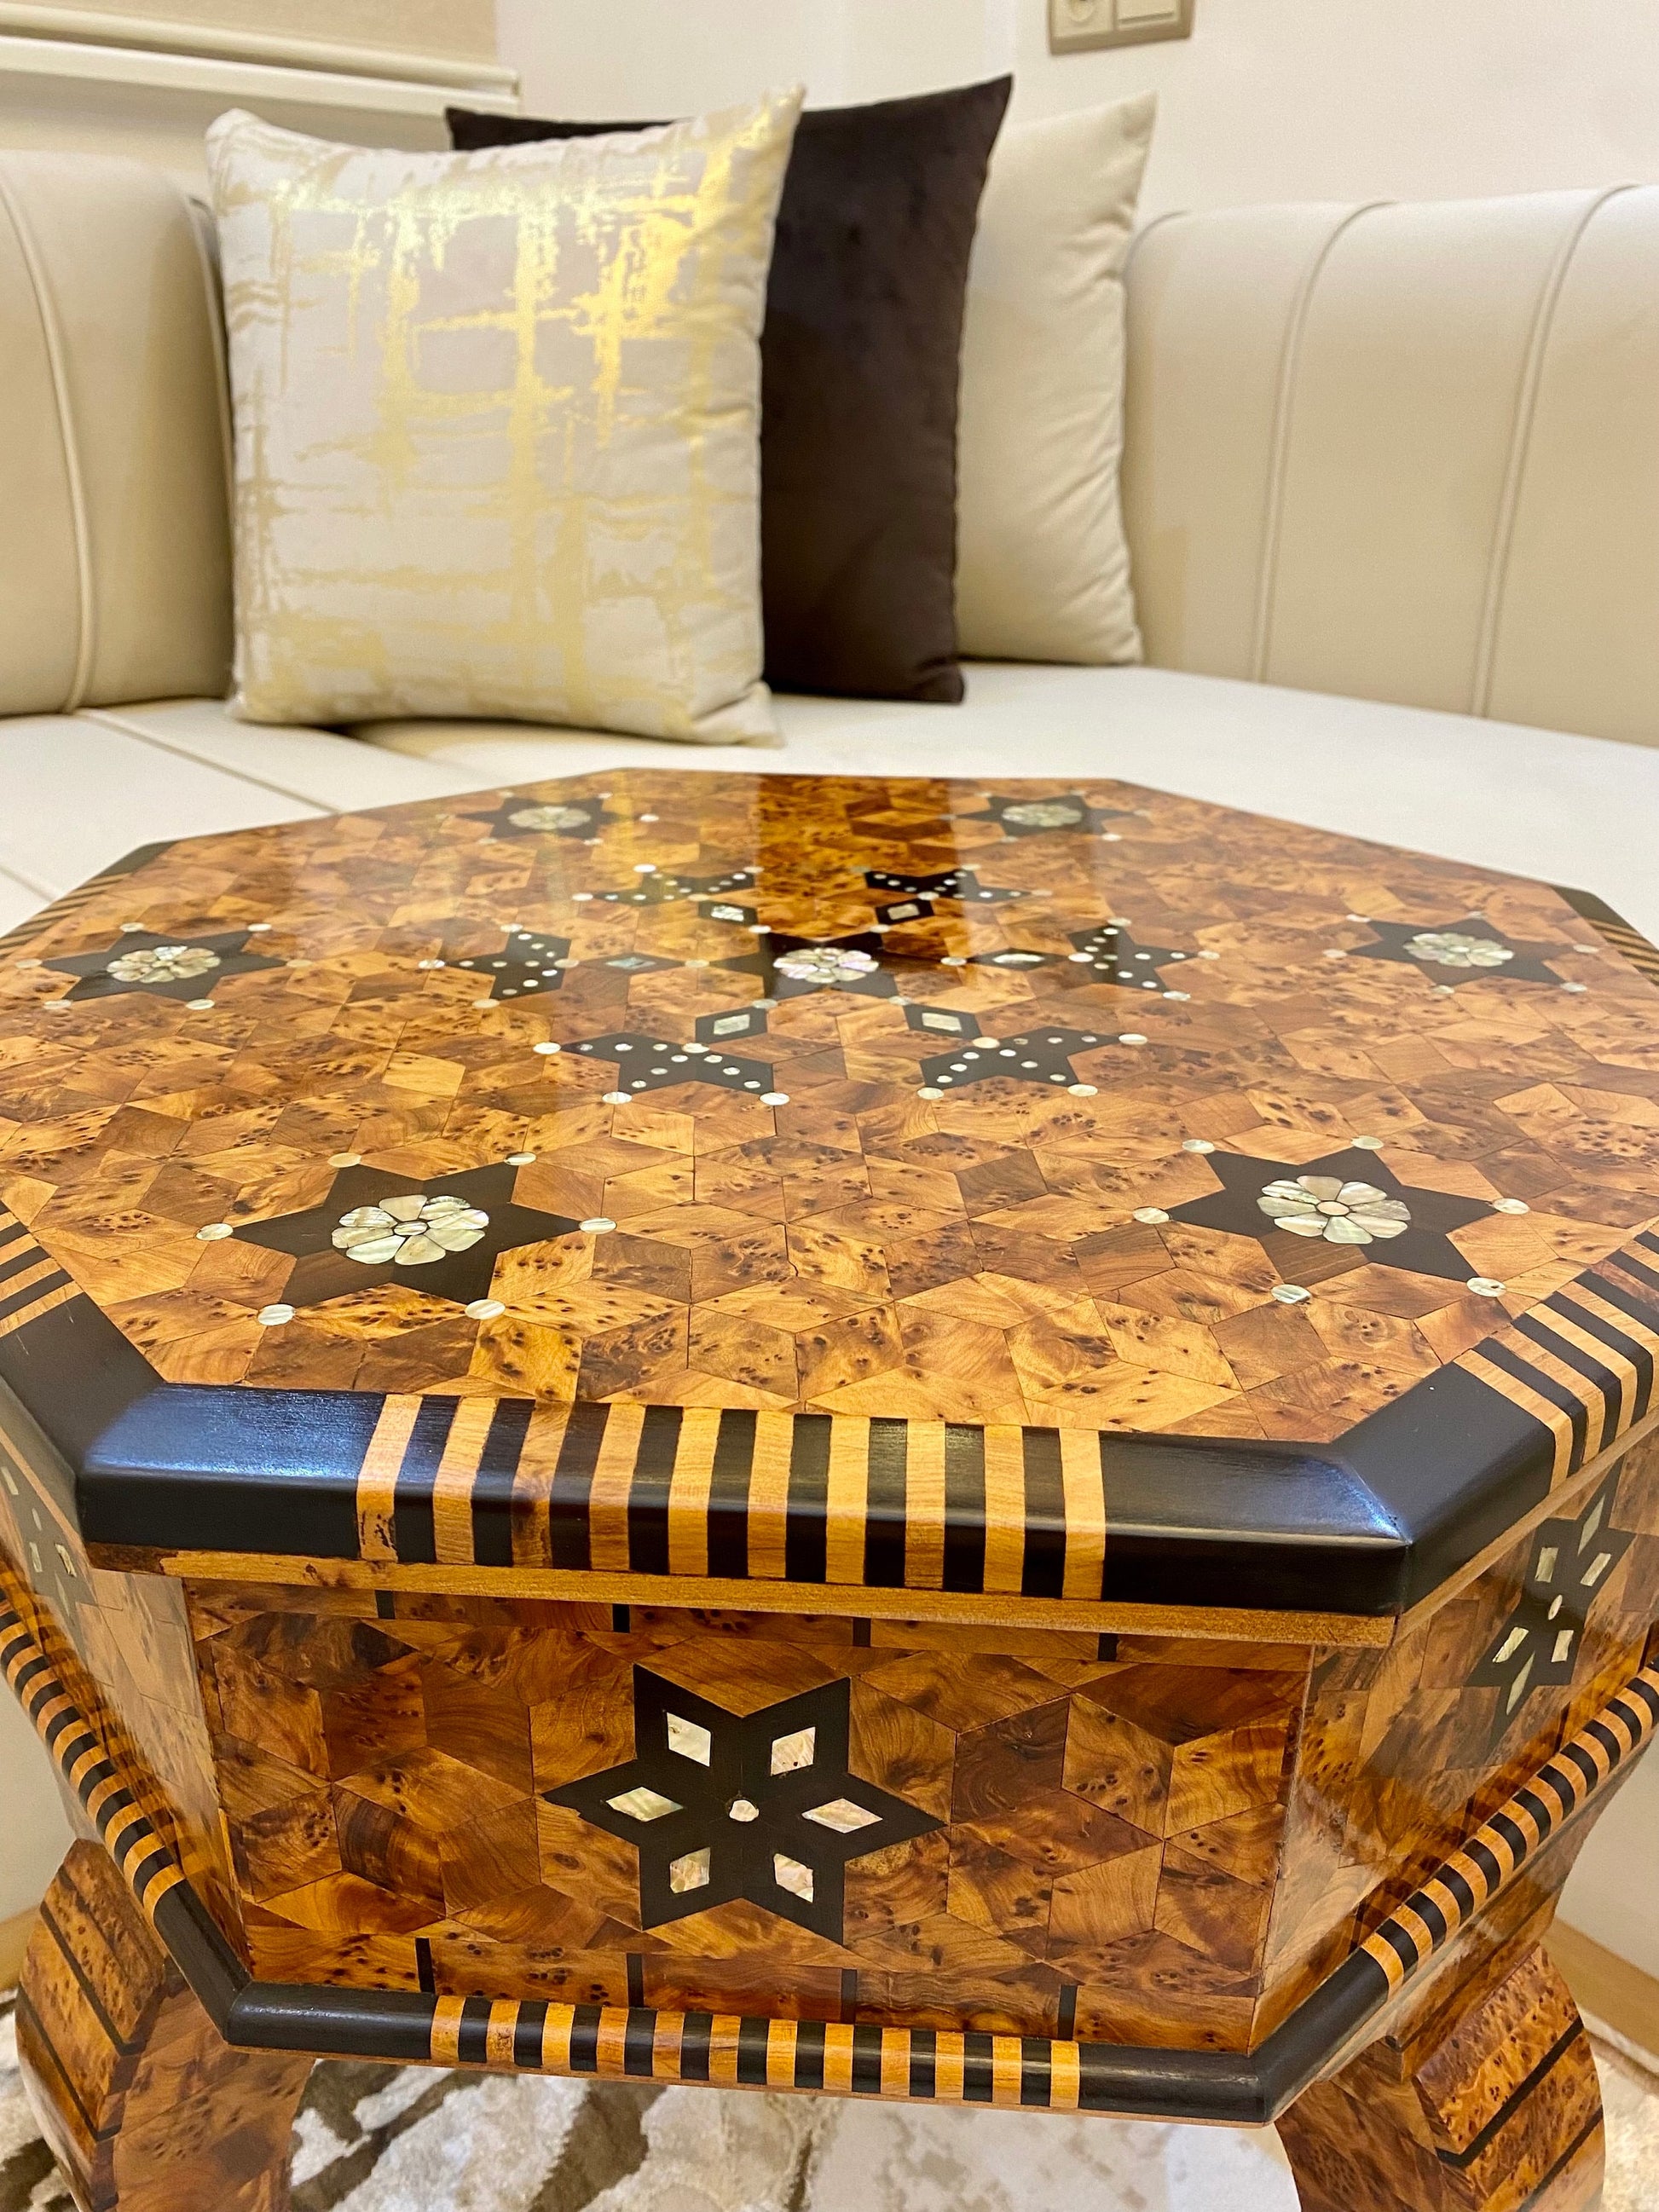 19"x19" Handmade Moroccan Hexagonal Mosaic Thuya Wood Table with mother of pearls and burned lemon wood Inlay,unique home decor living room